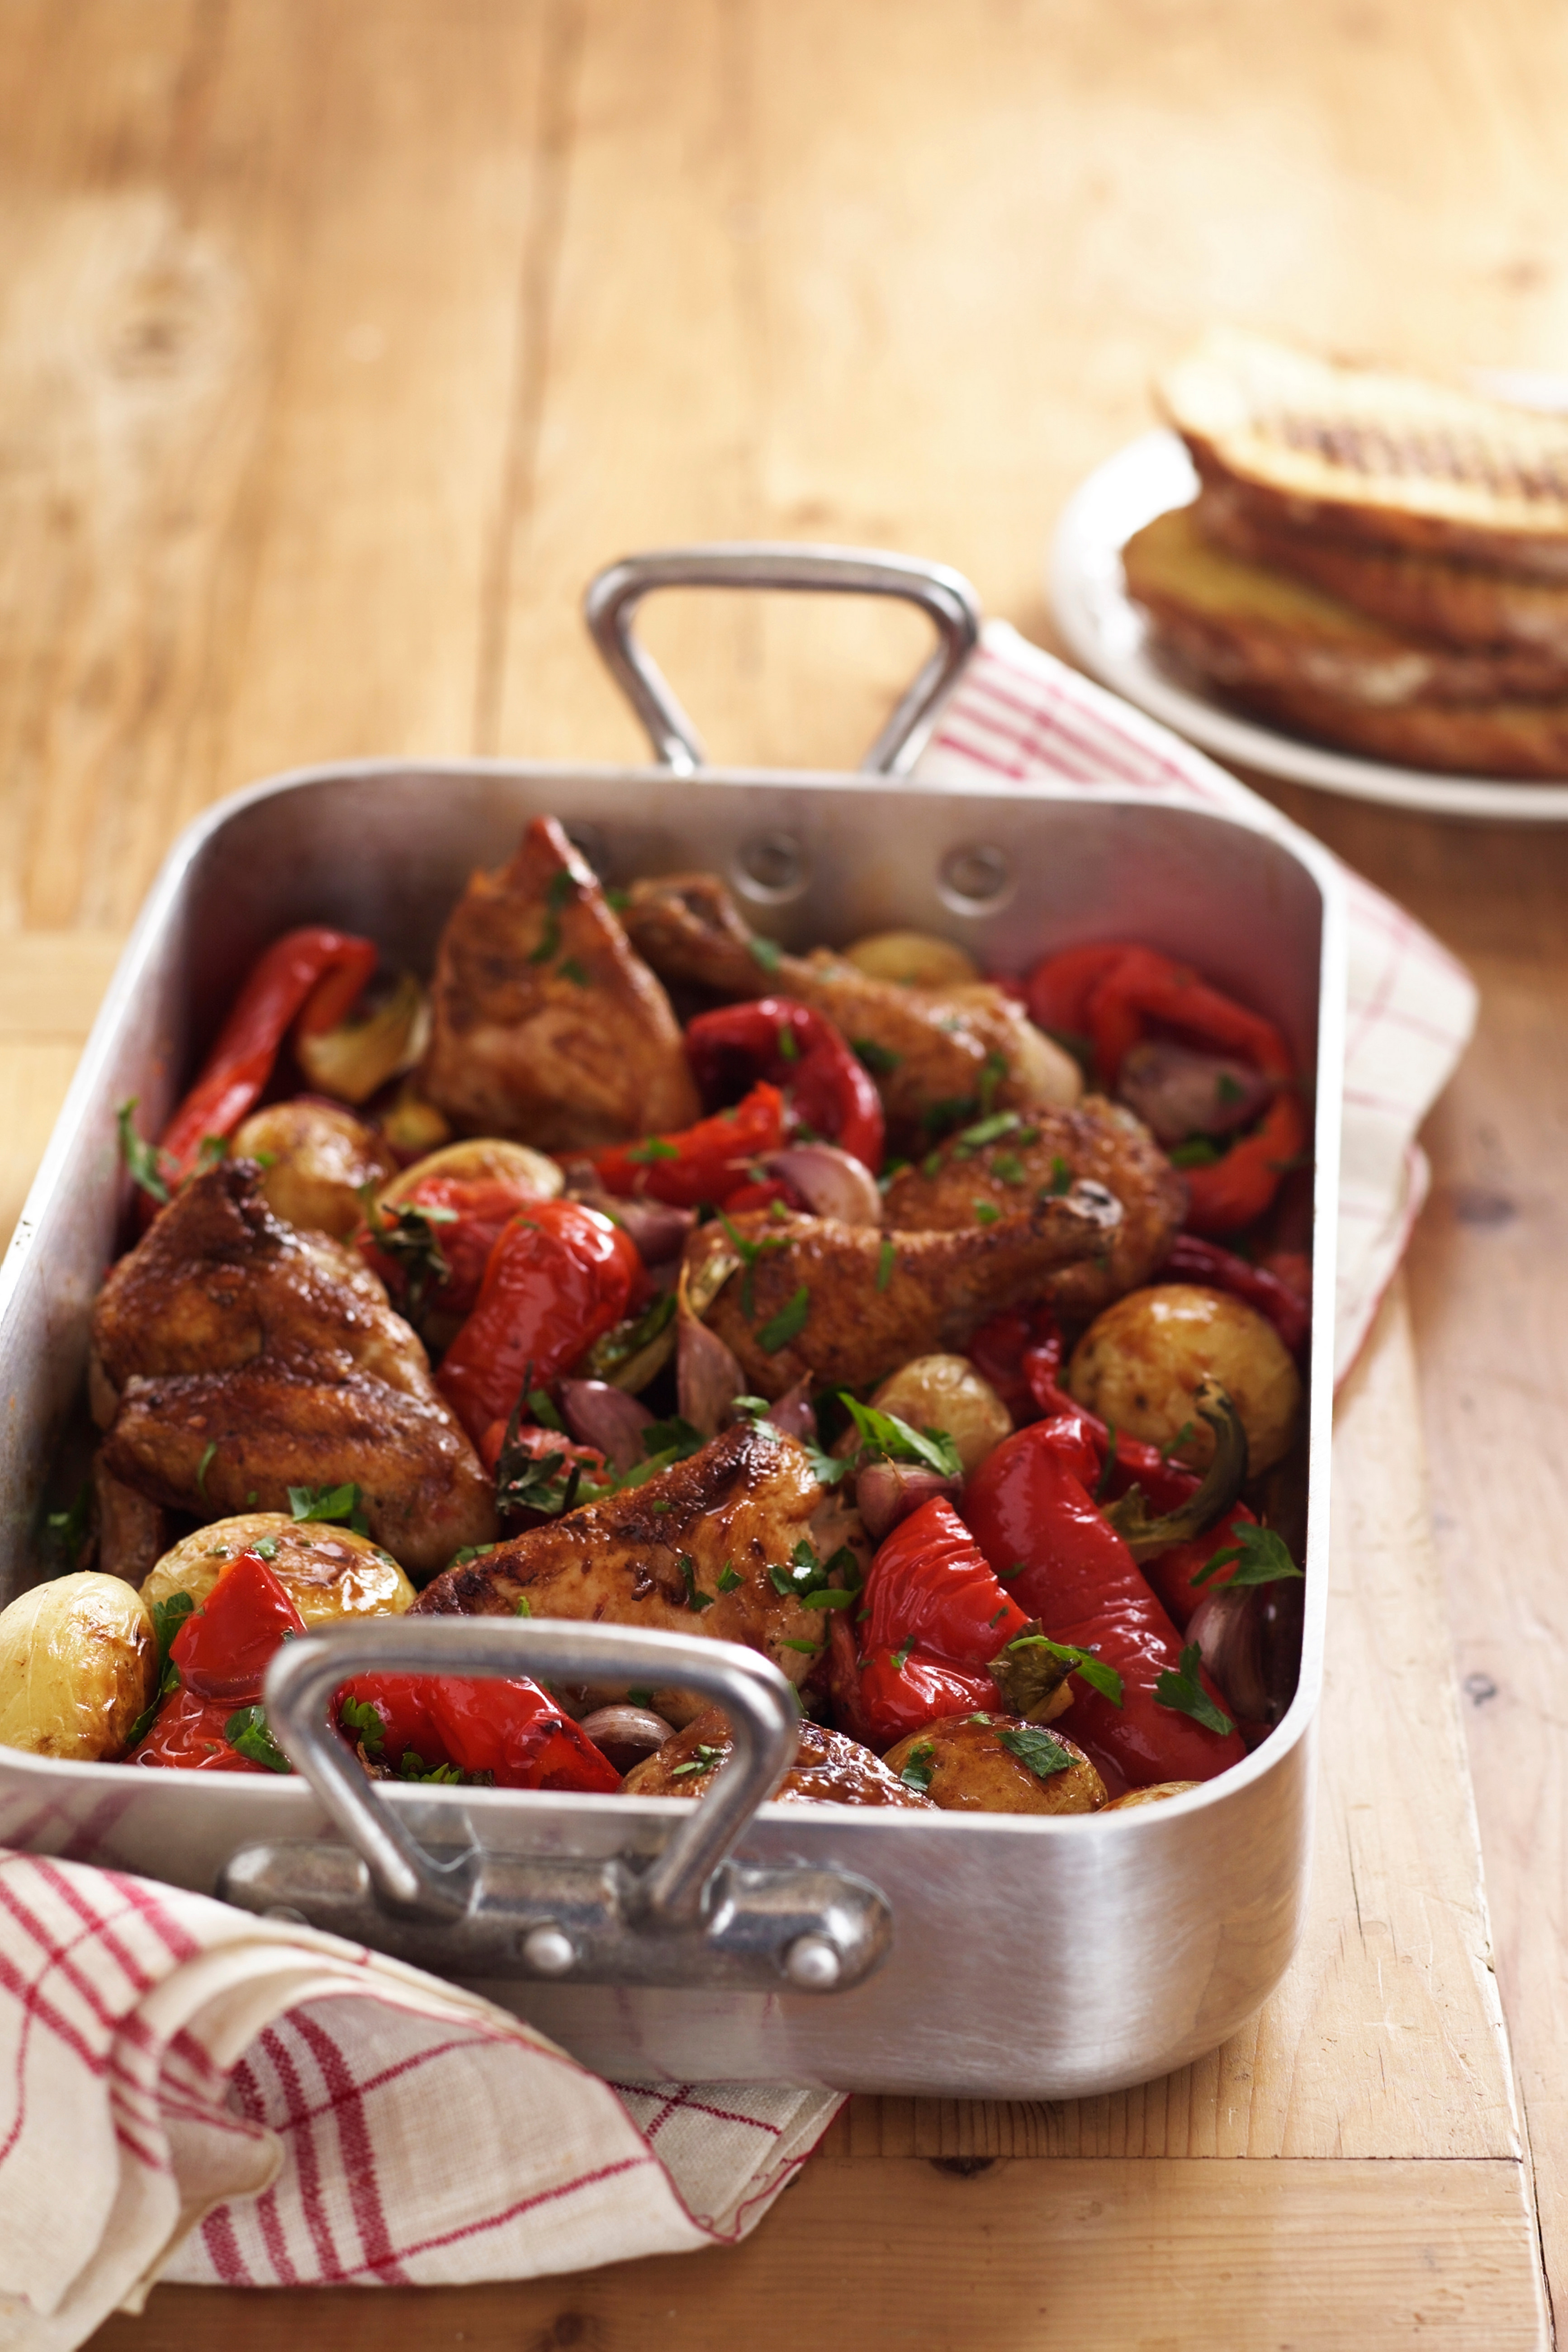 Roast chicken and vegetables in roasting tin